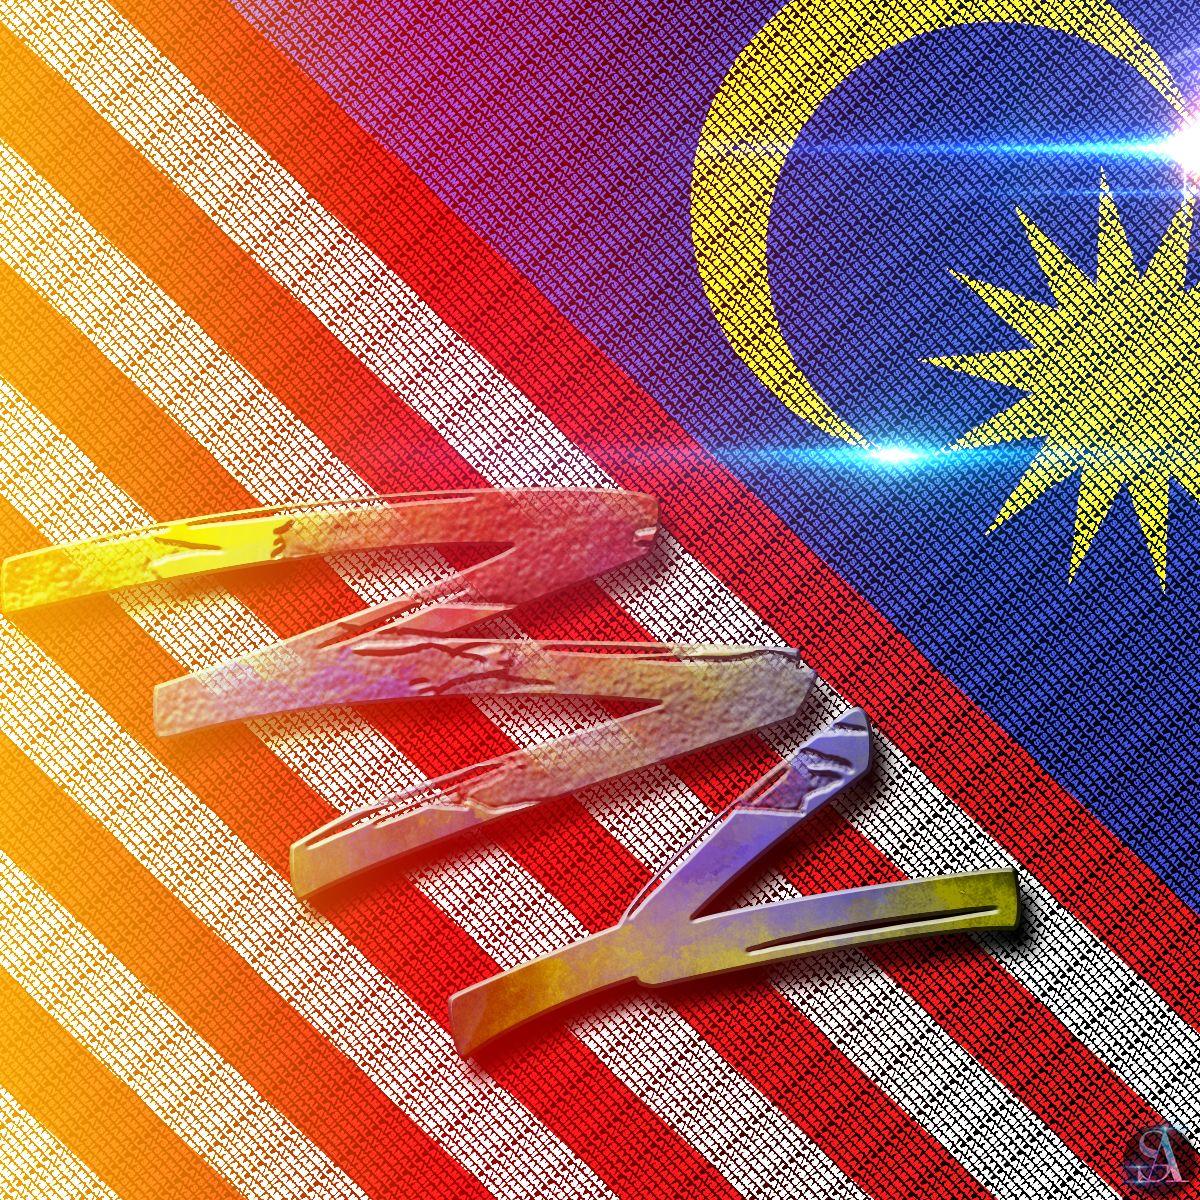 Backgrounds Wallpapers Bendera Malaysia ✓ Labzada Wallpapers